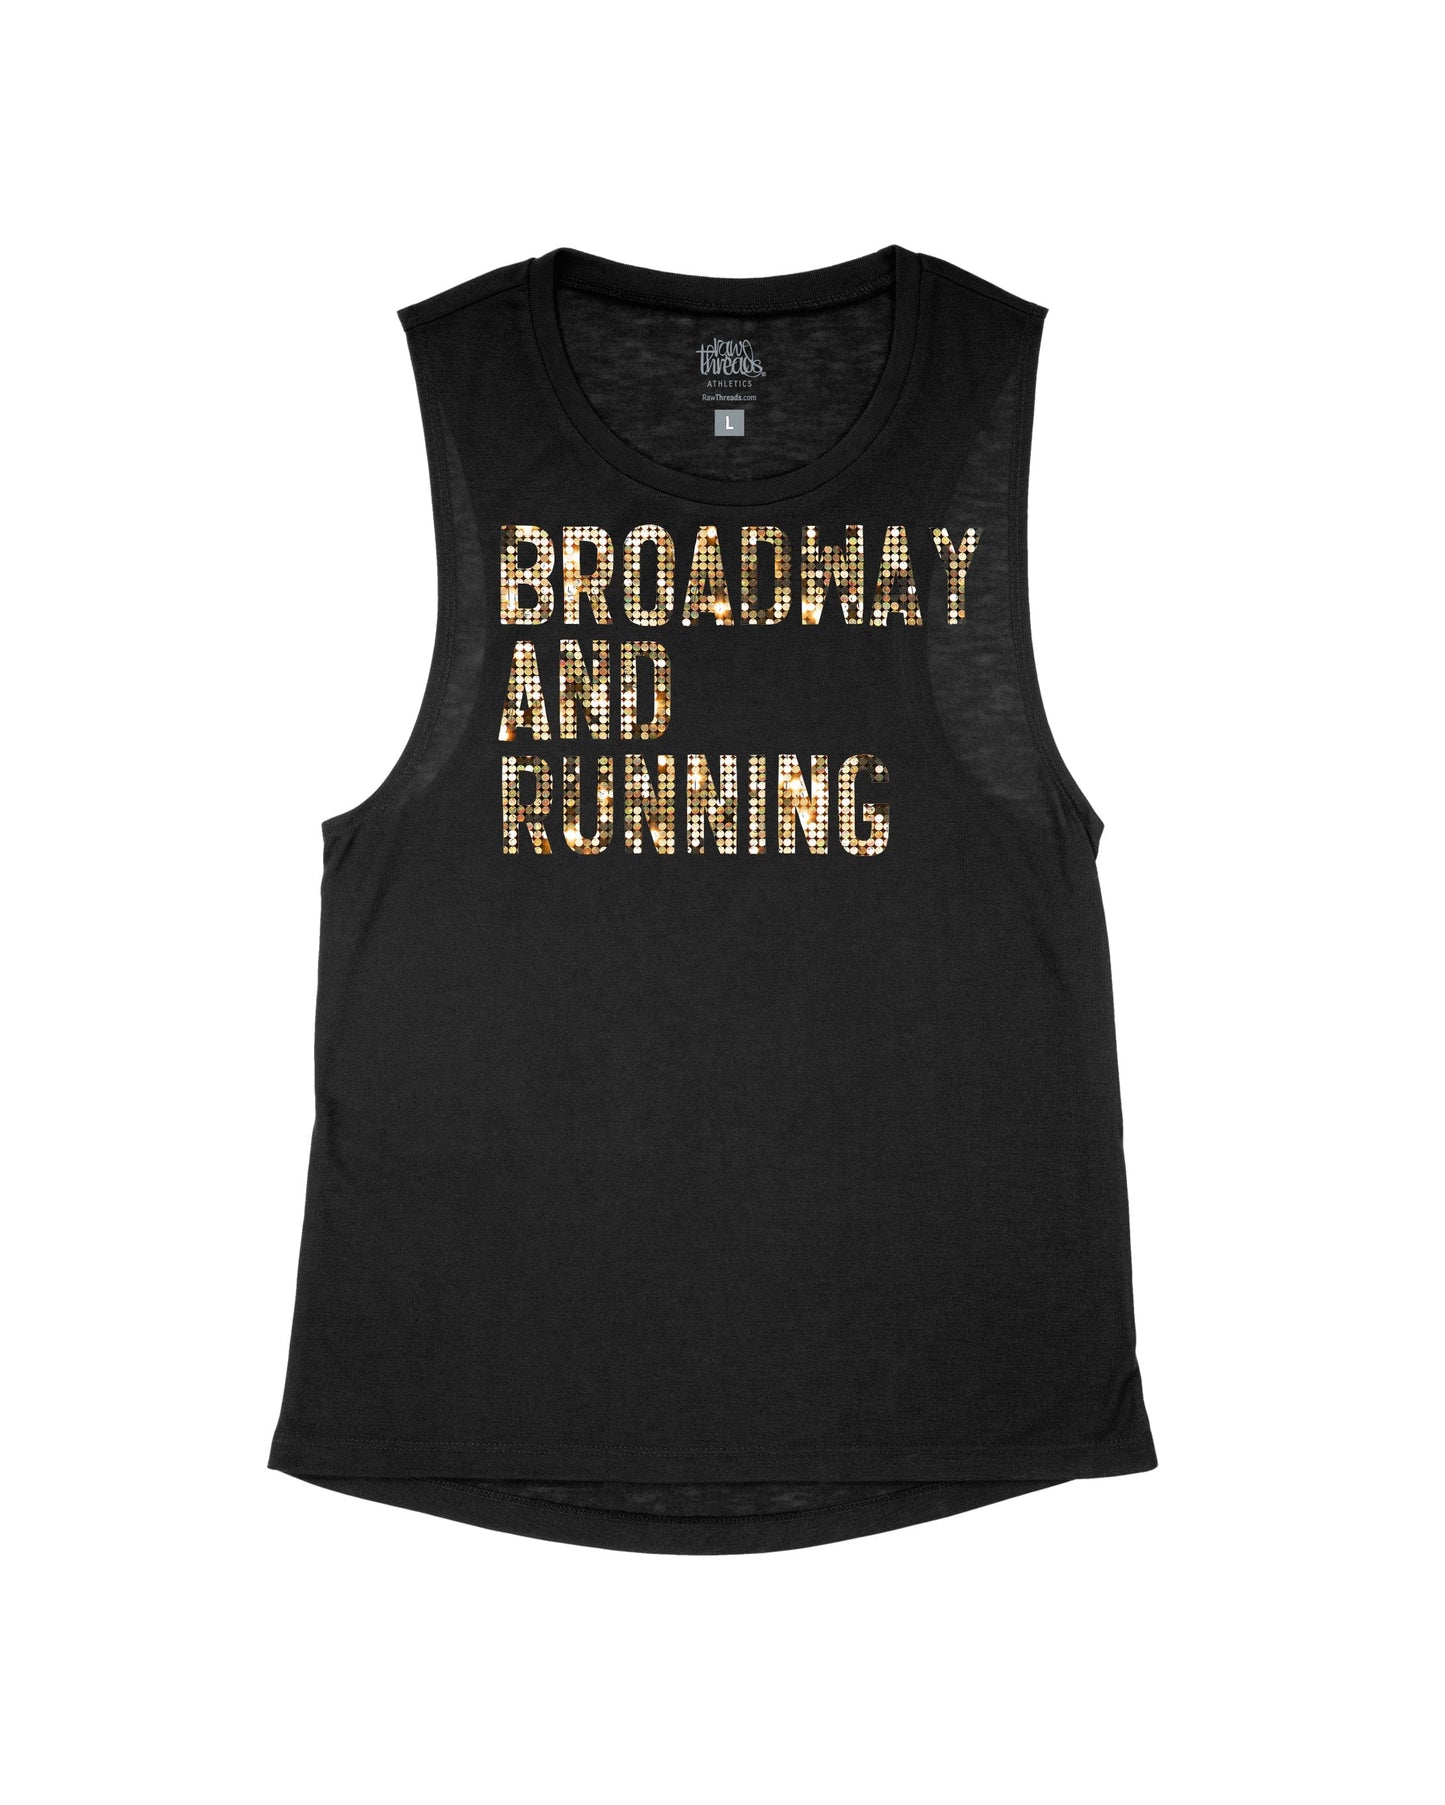 Broadway and Running